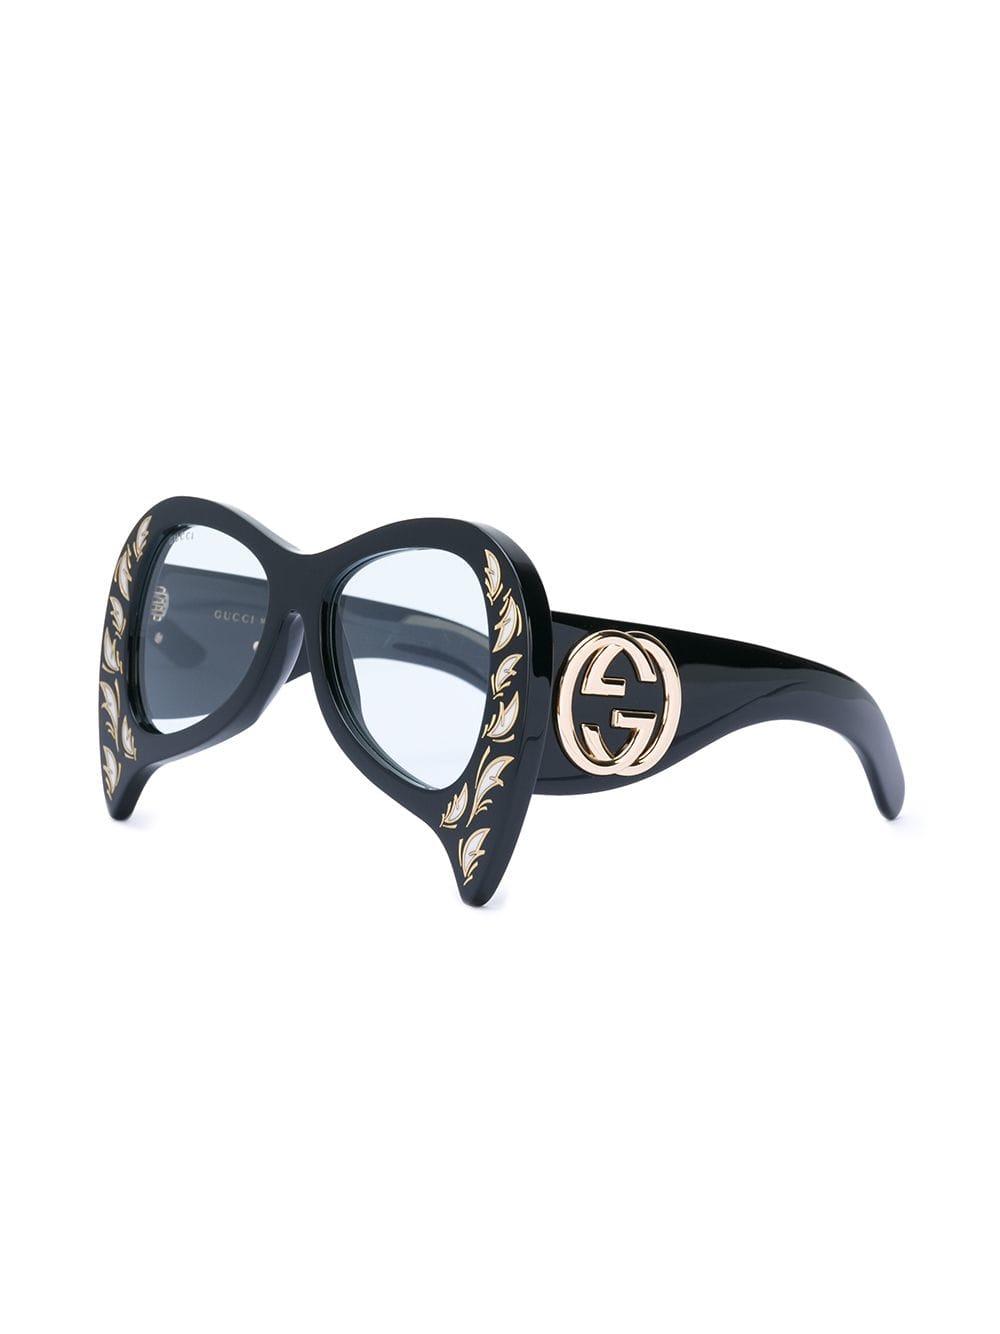 Gucci Inverted Cat Eye Glasses in Black | Lyst